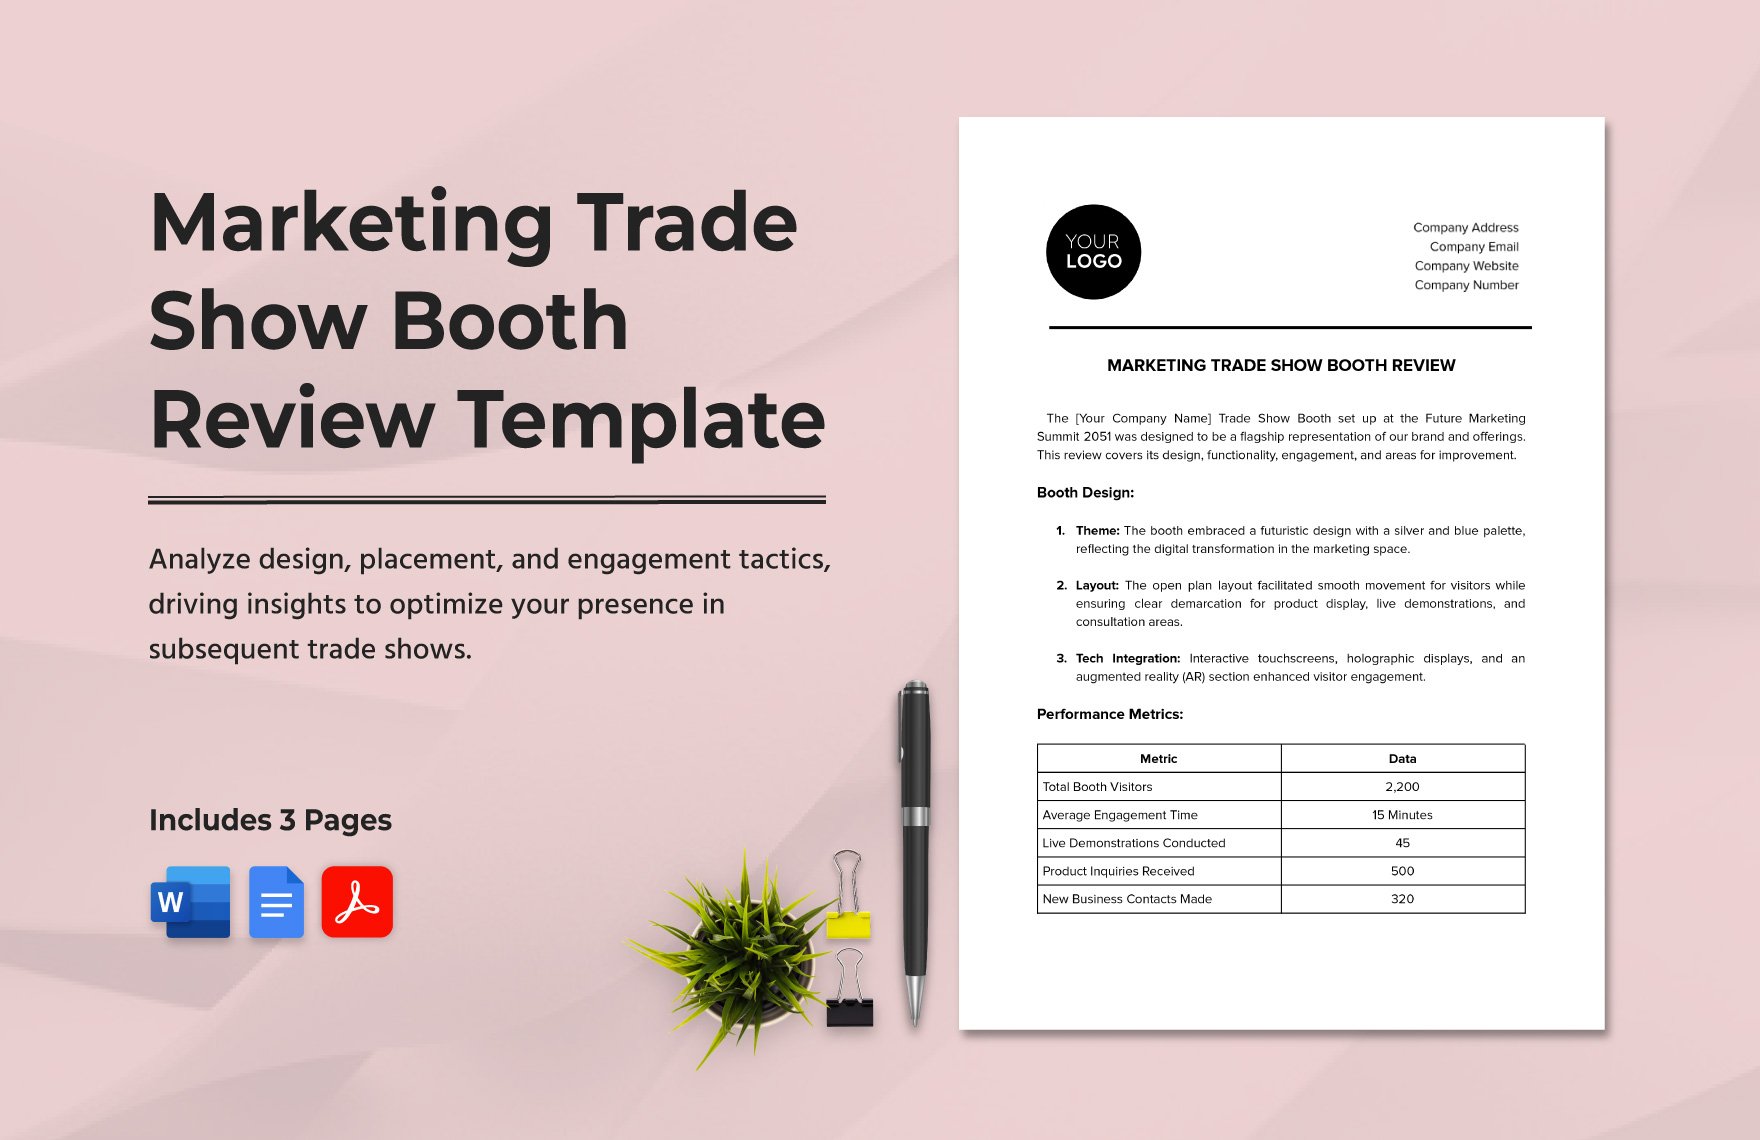 Marketing Trade Show Booth Review Template 